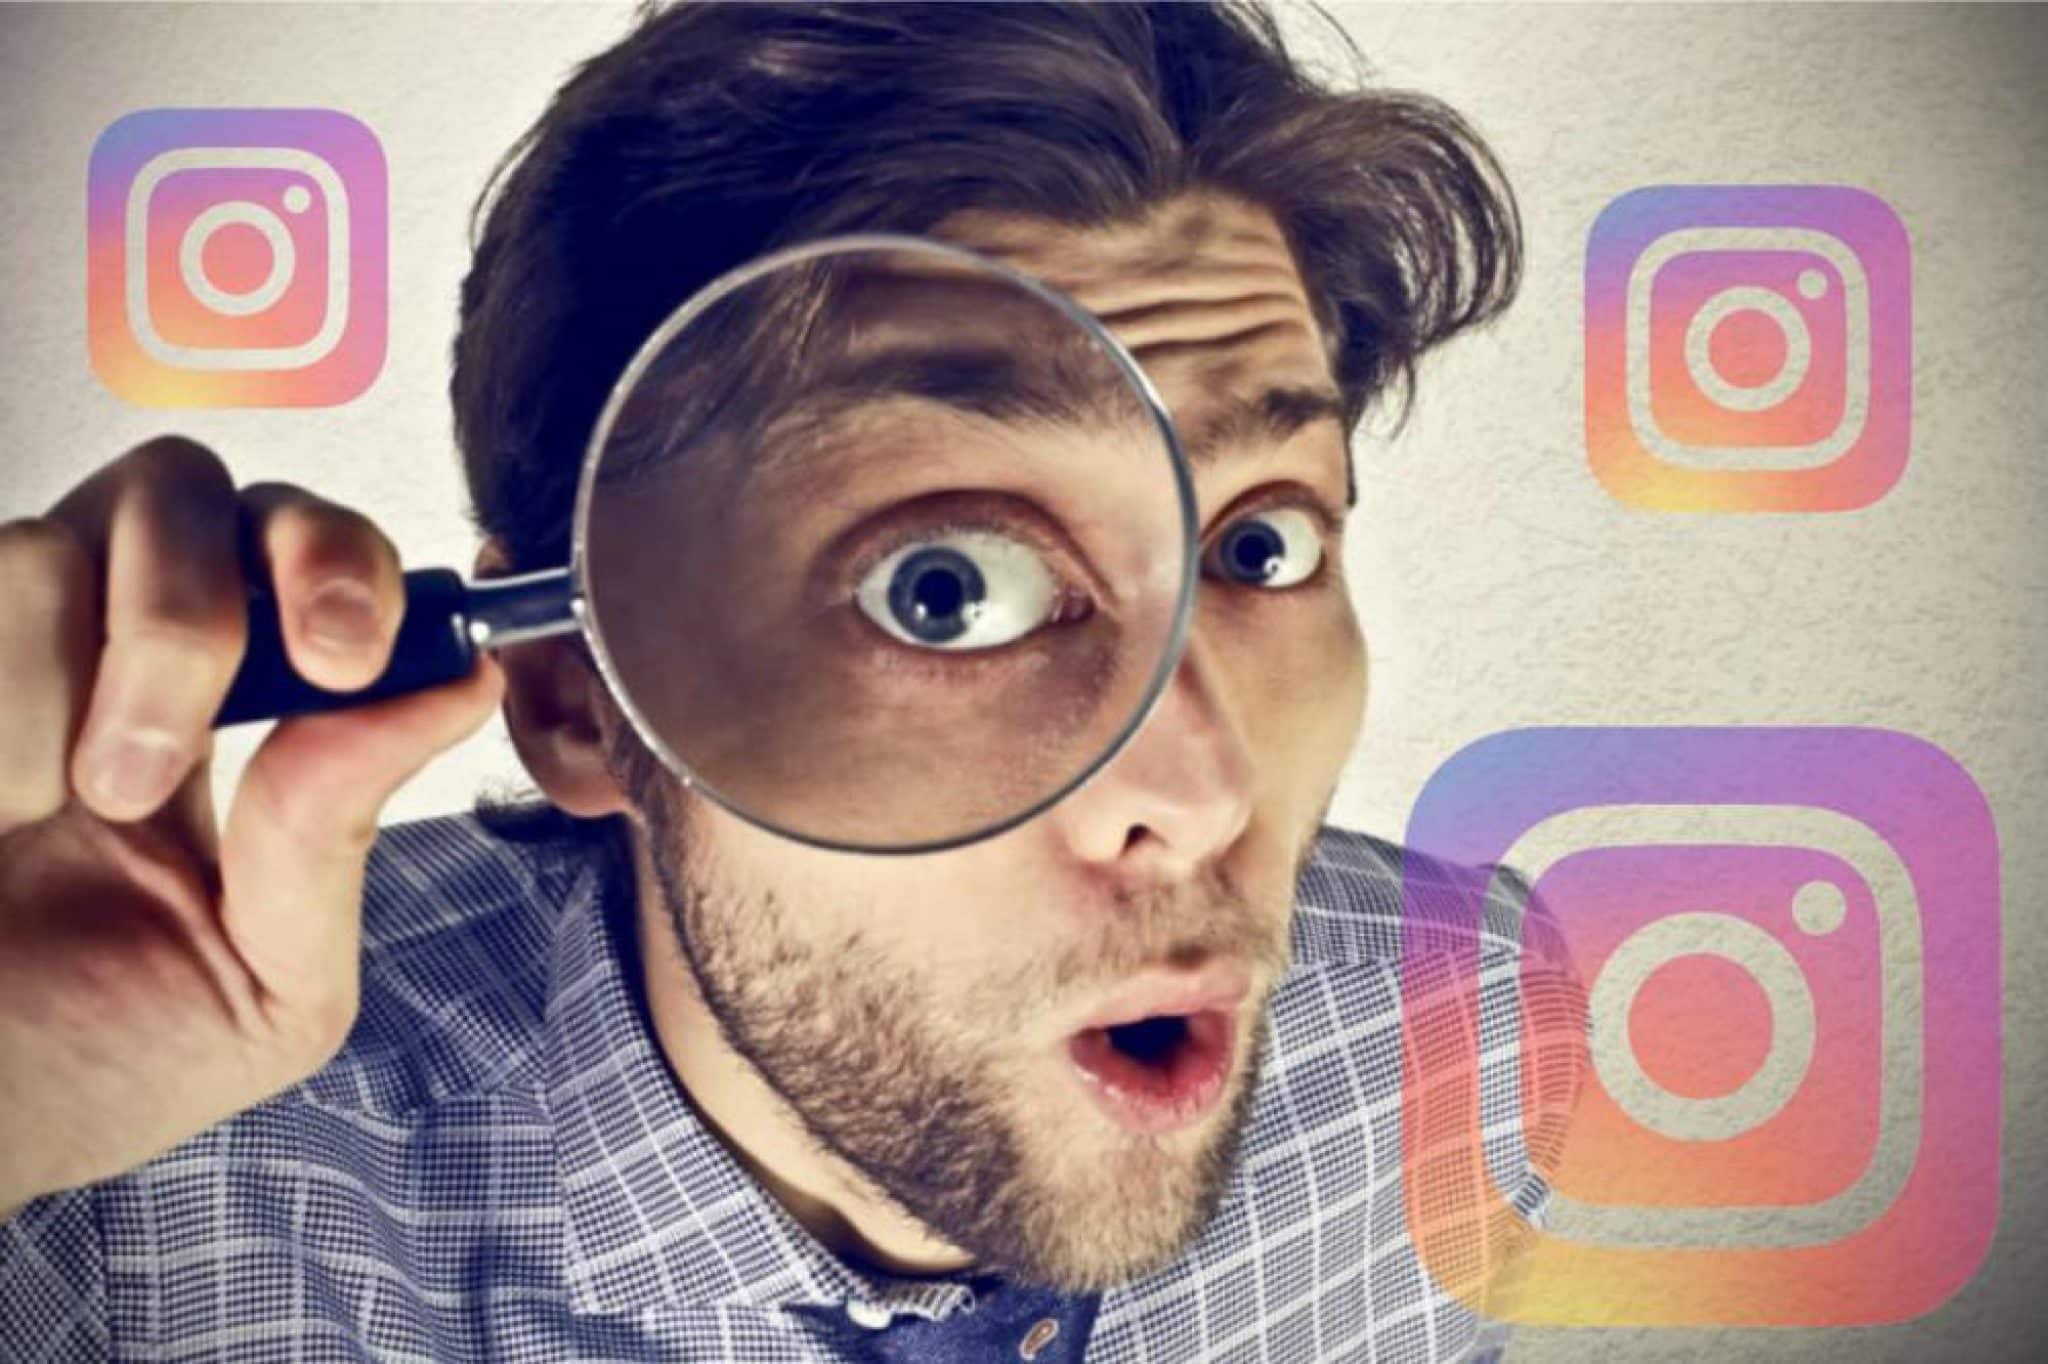 instagram and facebook tracking ip address